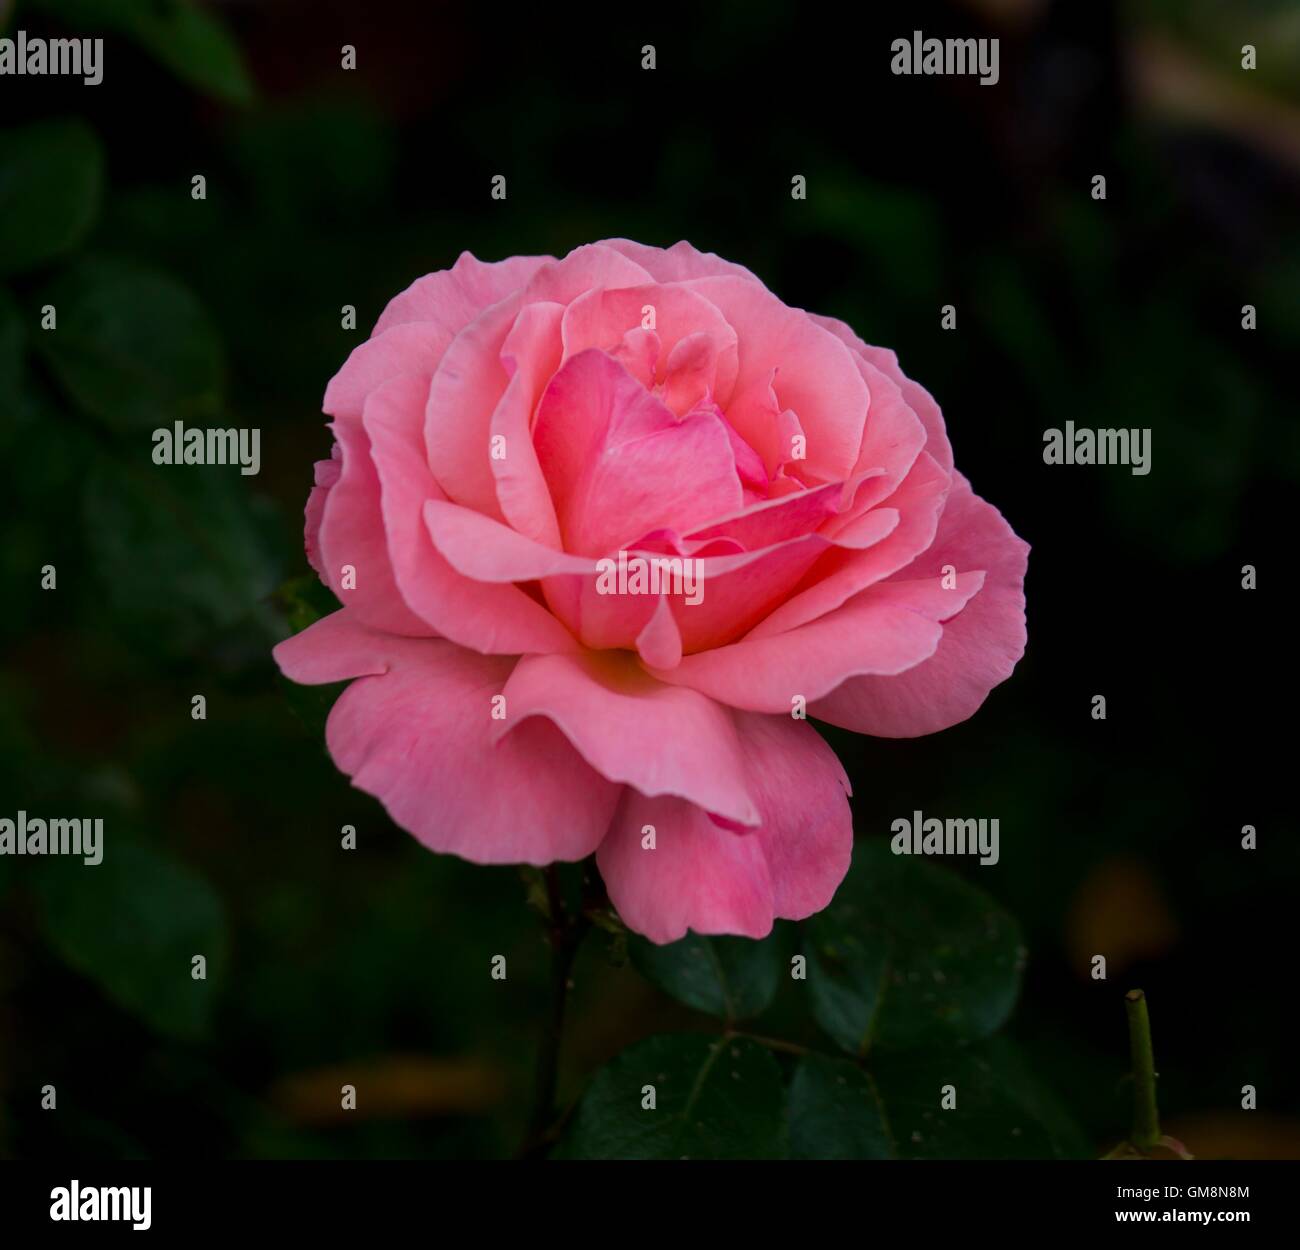 close up image of a pink rose Stock Photo